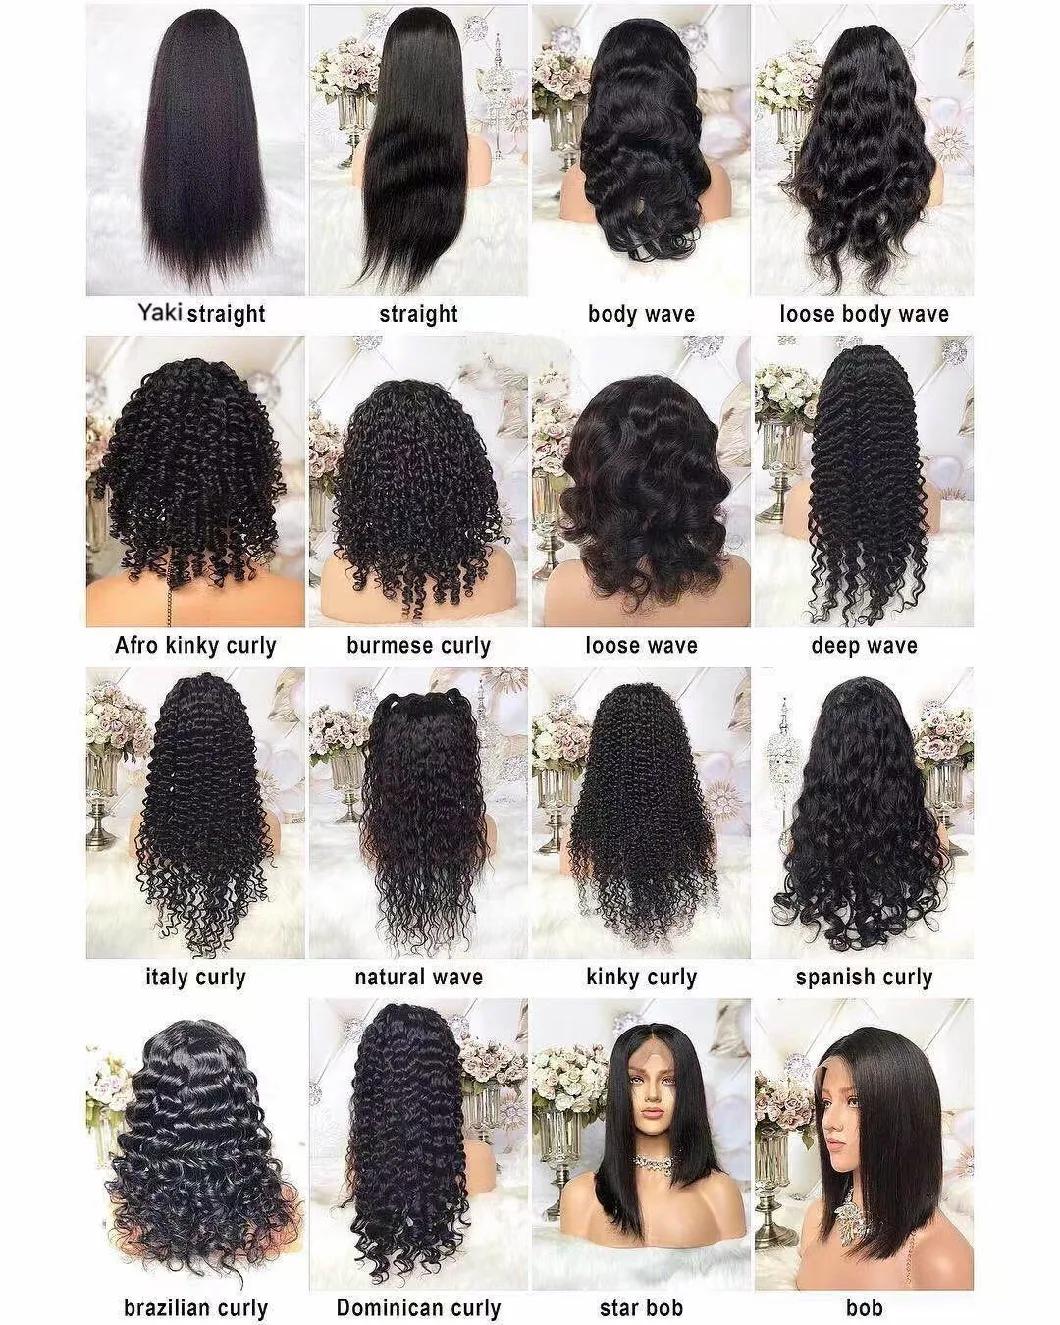 Wholesale Lace Front Human Hair Wigs for Black Women Brazilian Deep Wave Wig Pre Plucked